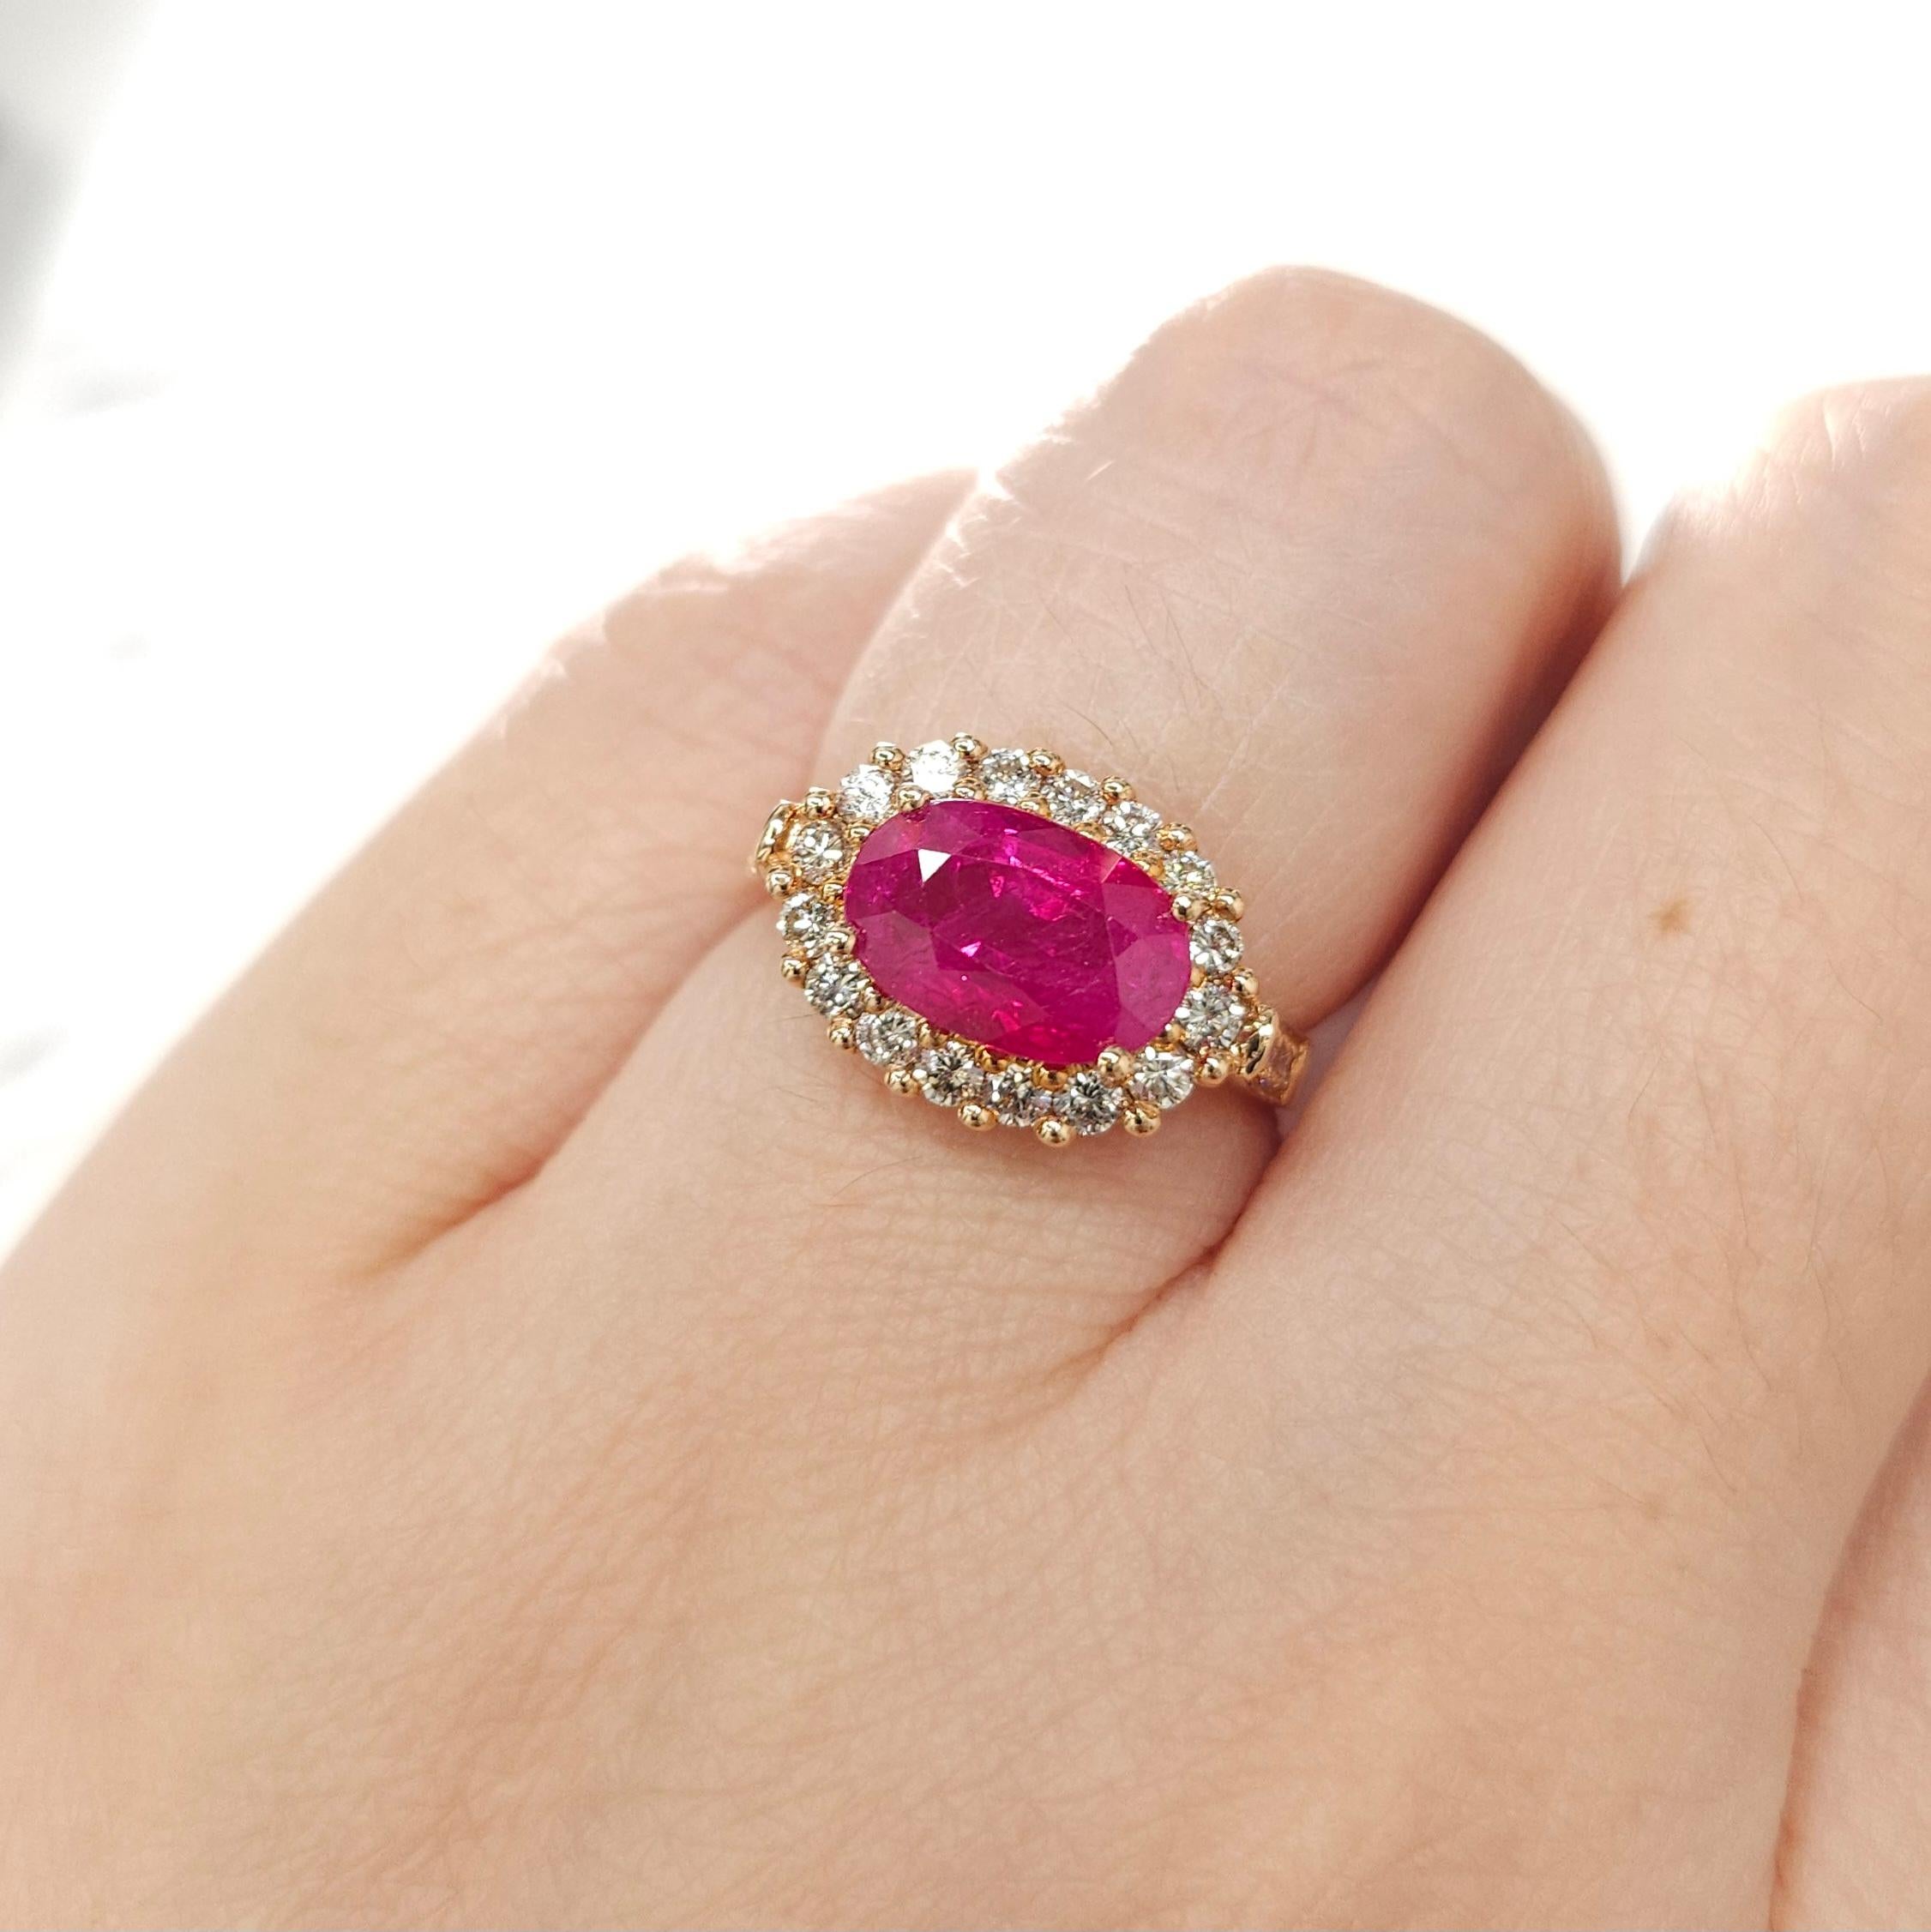 Experience the sheer elegance and modern sophistication of the IGI Certified 3.01 Carat ruby ring. This exquisite piece features a mesmerizing oval-shaped ruby, certified by the International Gemological Institute (IGI), renowned for its exceptional